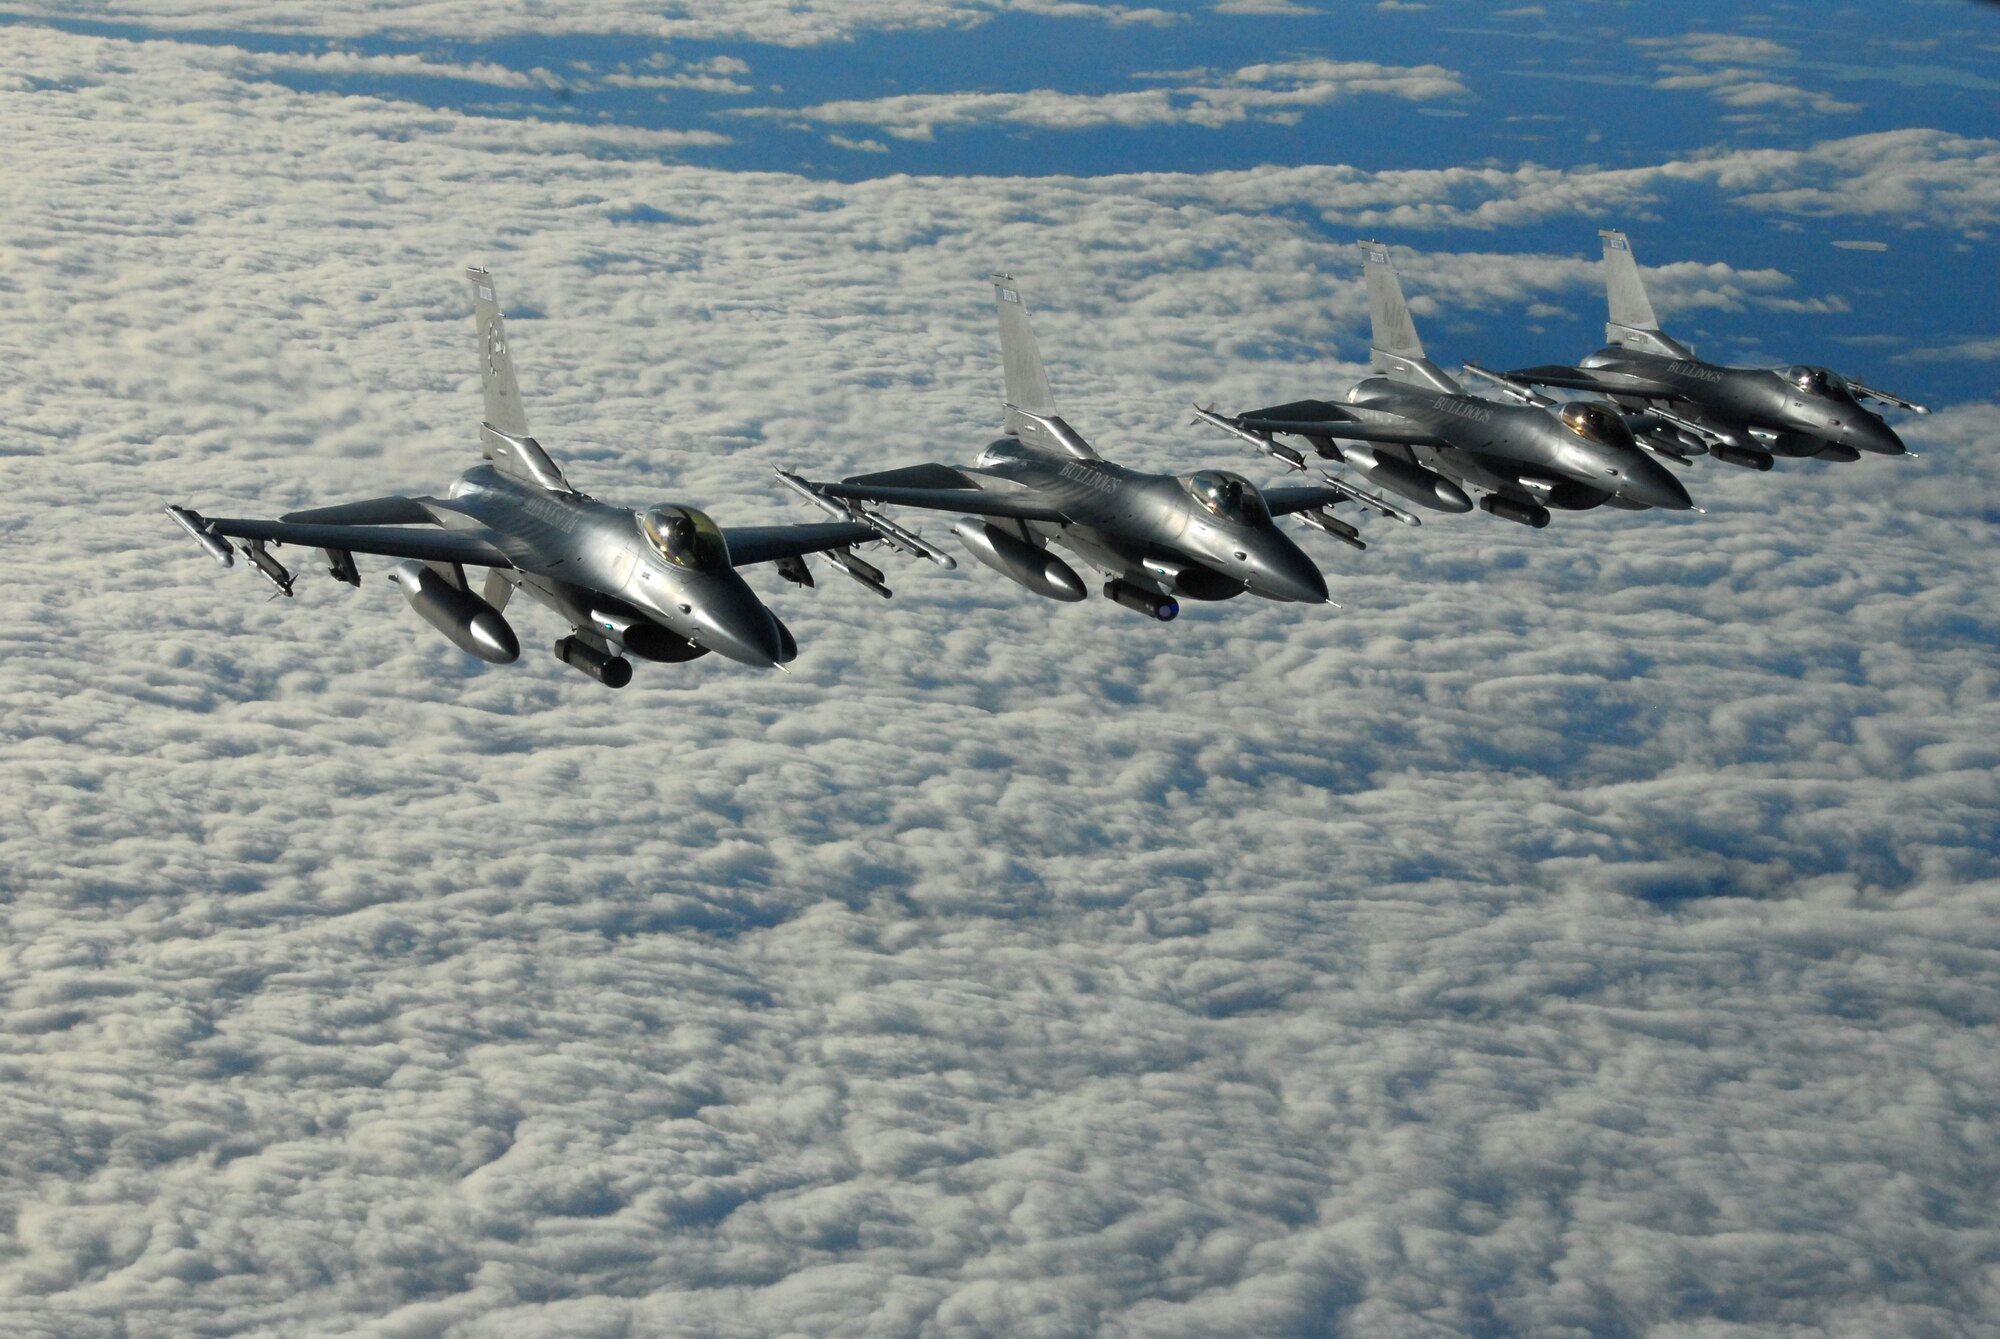 A four ship F-16 Fighting Falcon formation flies through the sky on a mission in northern Minnesota on Nov. 17, 2007.  The F-16's, from the 148th Fighter Wing of the Minnesota Air National Guard in Duluth, were practicing mid-air refueling from a KC-135 Stratotanker in order to fulfill training requirements.  (U.S. Air Force photo by Tech. Sgt. Brett R. Ewald)  (Released)